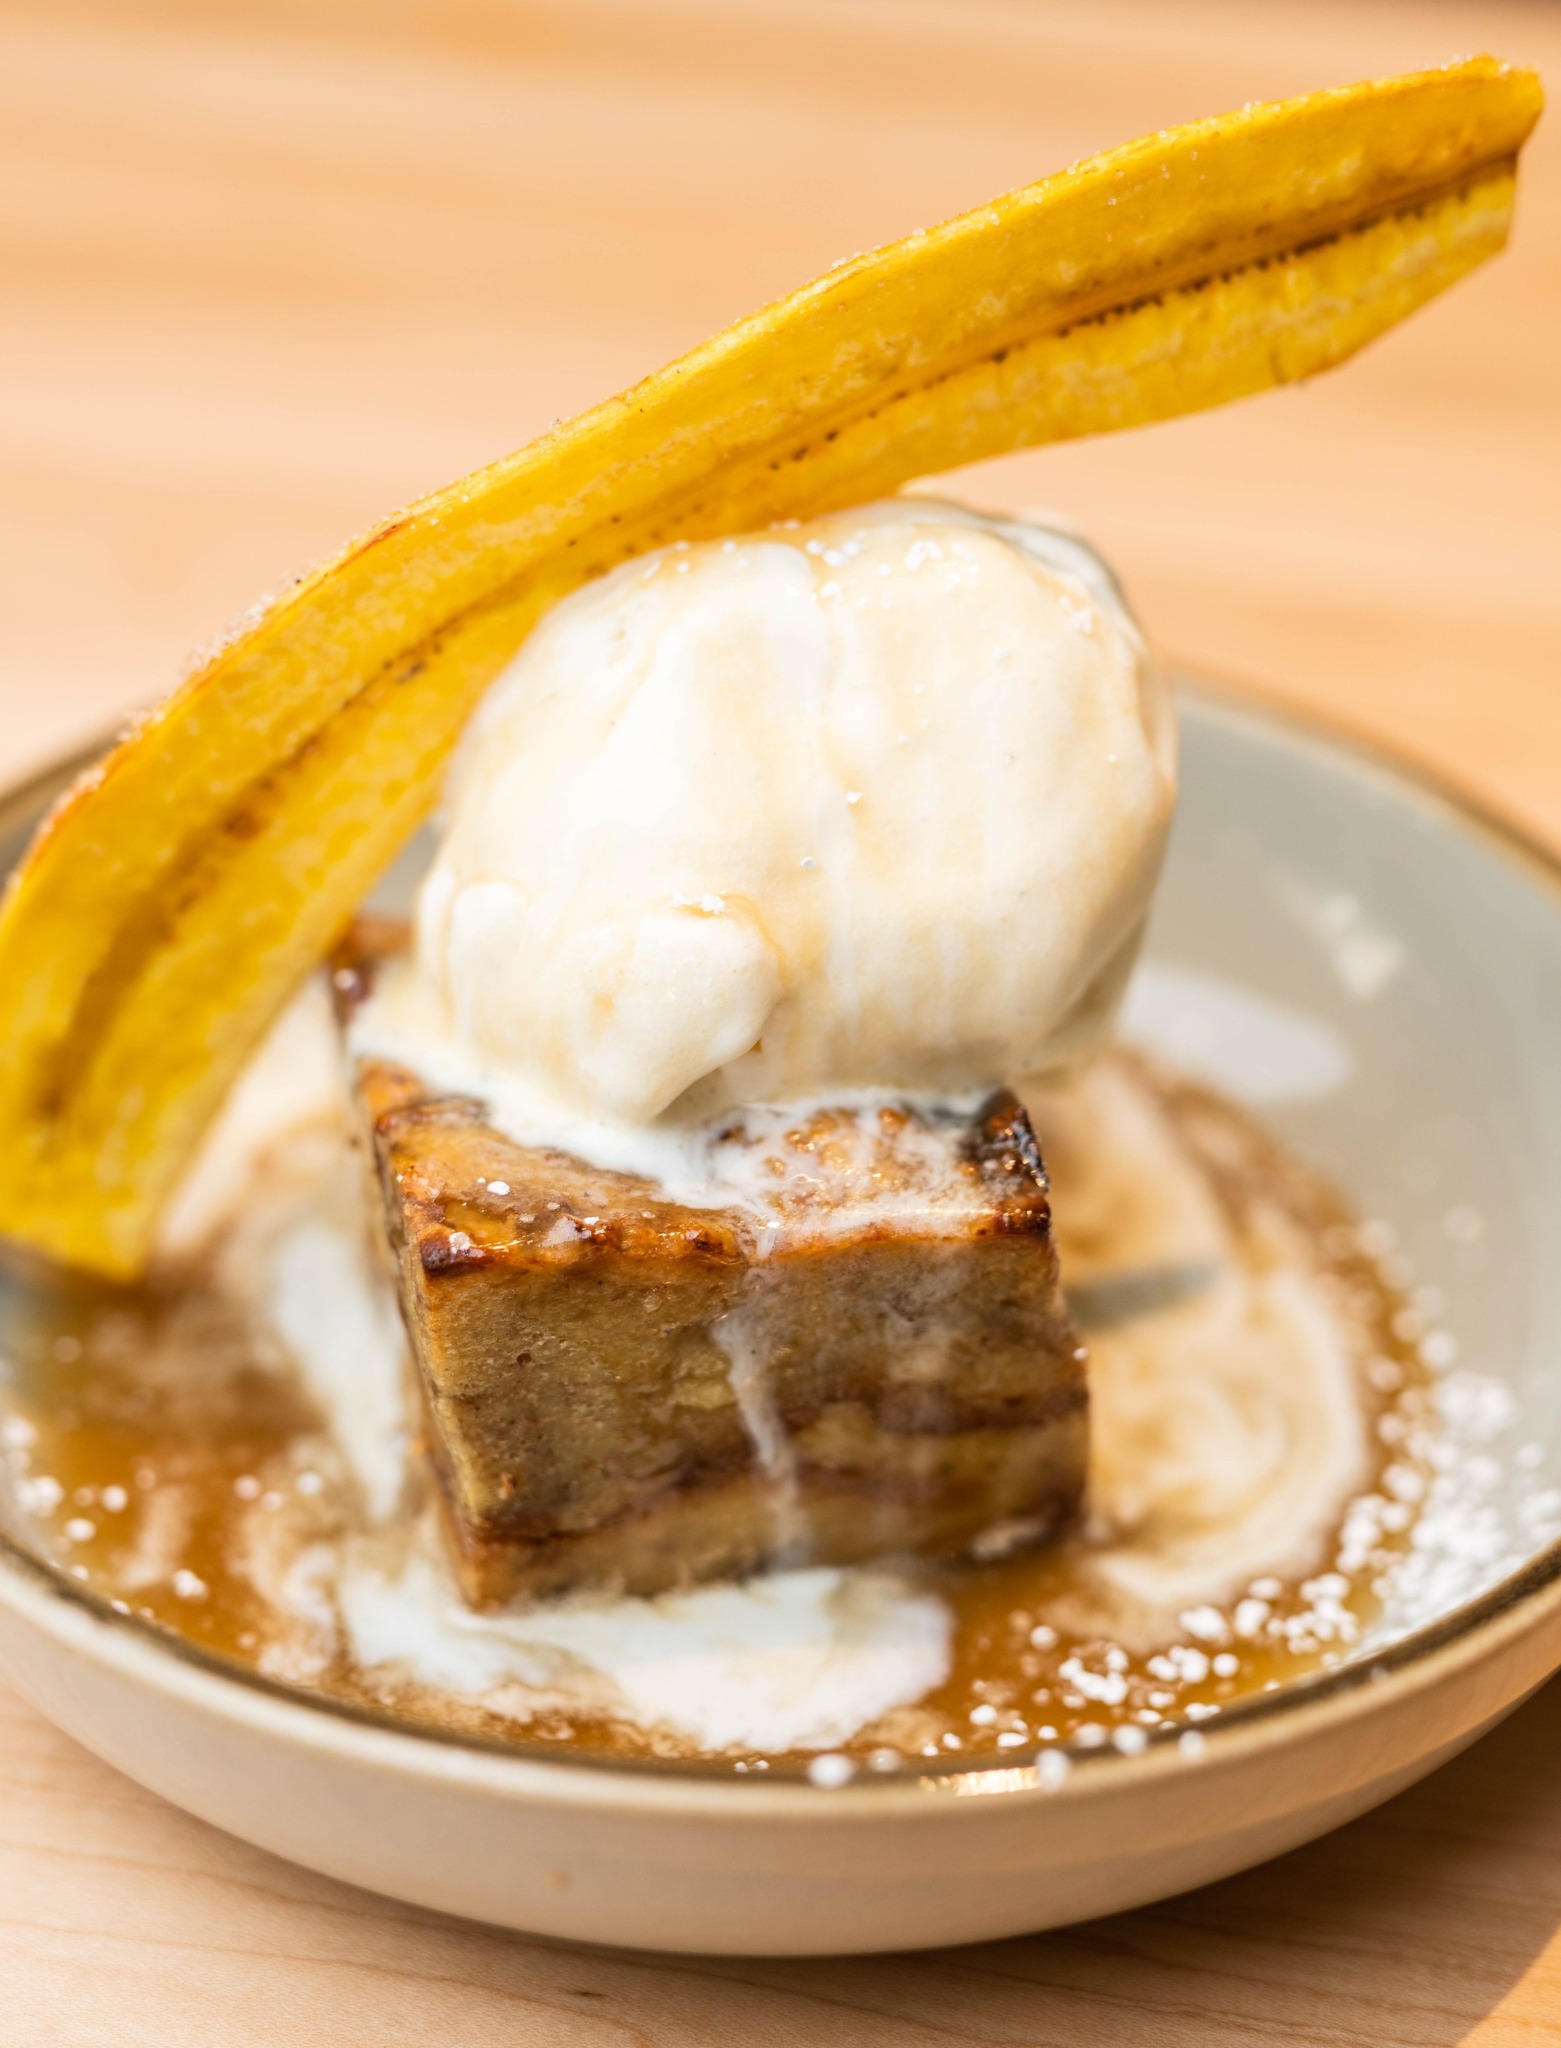 A plate of bananas foster bread pudding with a scoop of ice cream and half a banana cut long ways